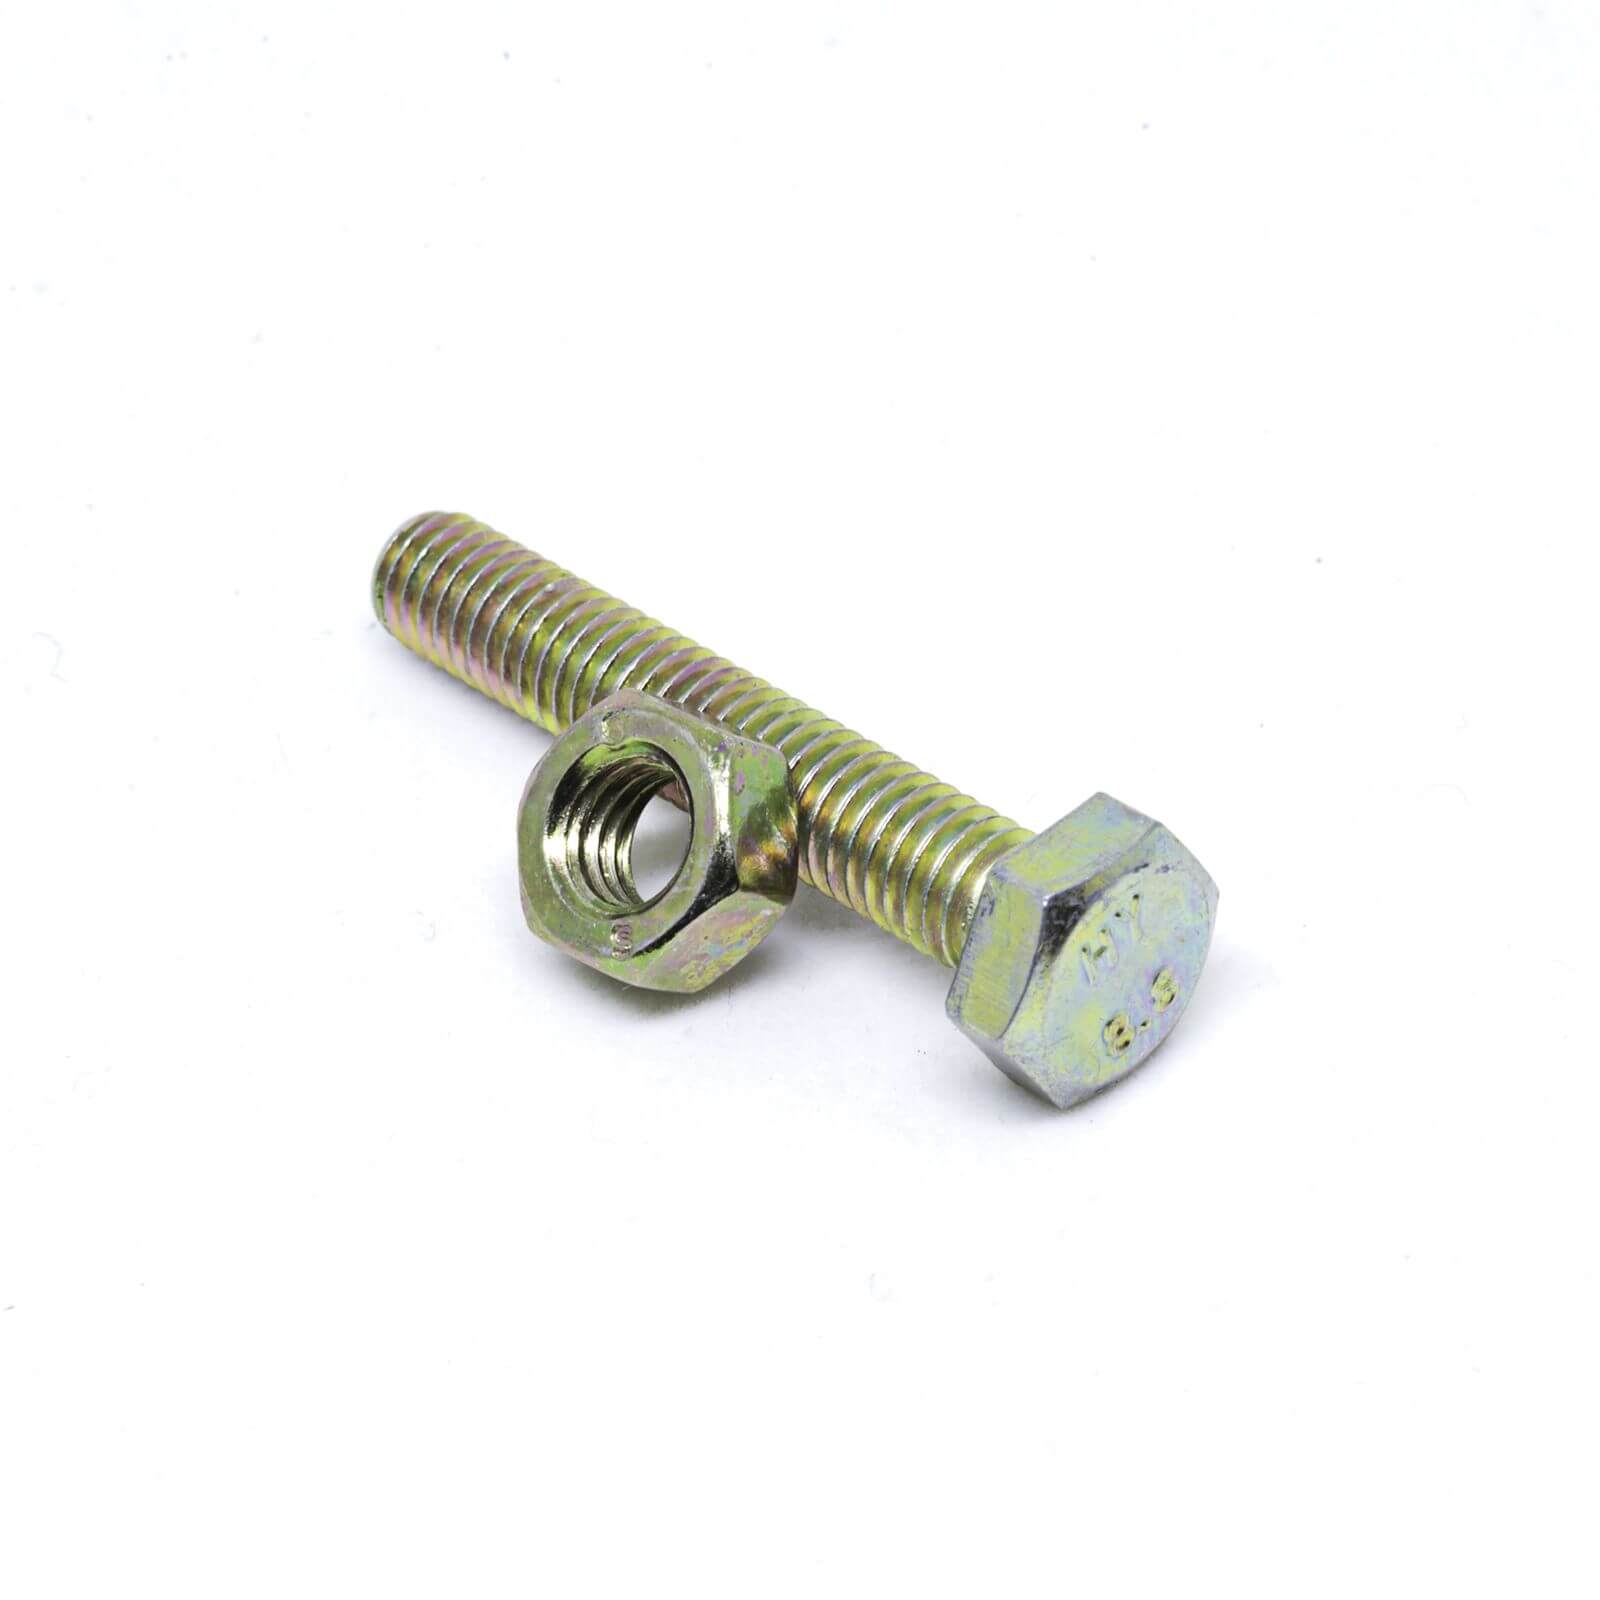 Pinnacle High Tensile Bolts and Nuts - 8 x 35mm - 4 Pack